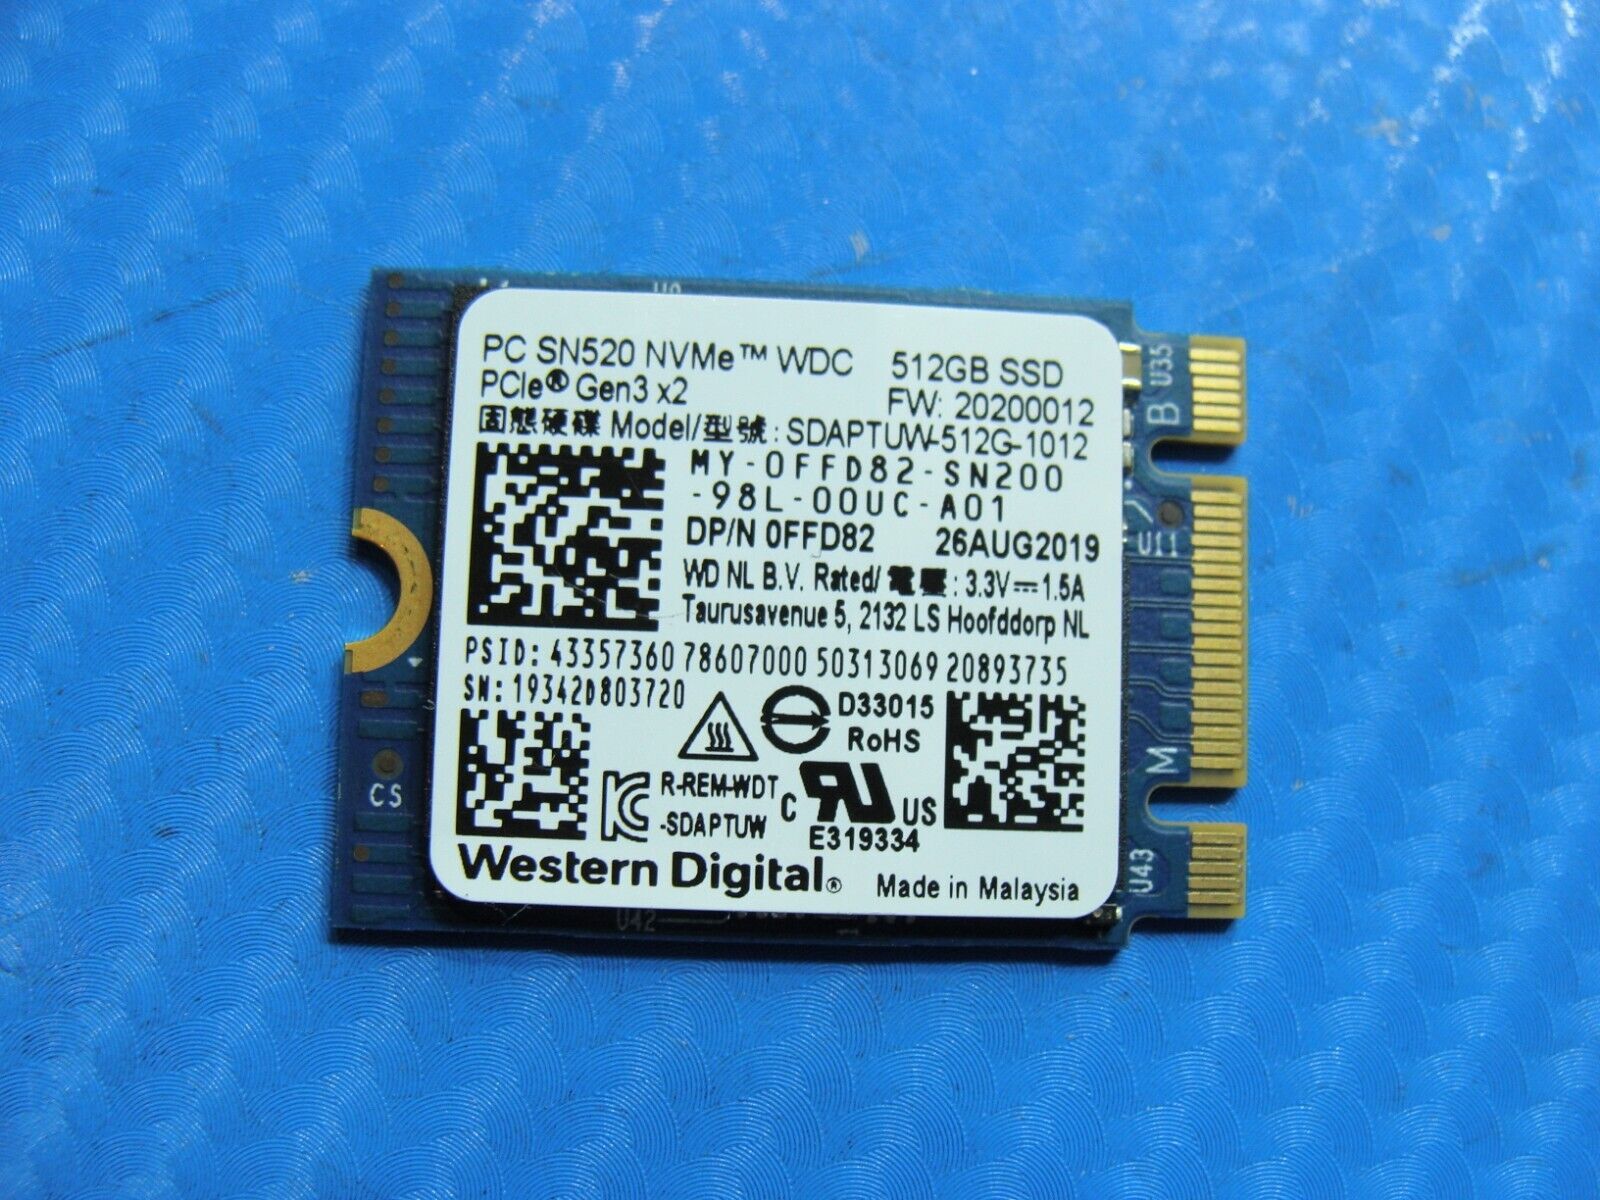 Dell 5300 Western Digital 512GB NVMe M.2 SSD Solid State Drive SDAPTUW-512G-1012